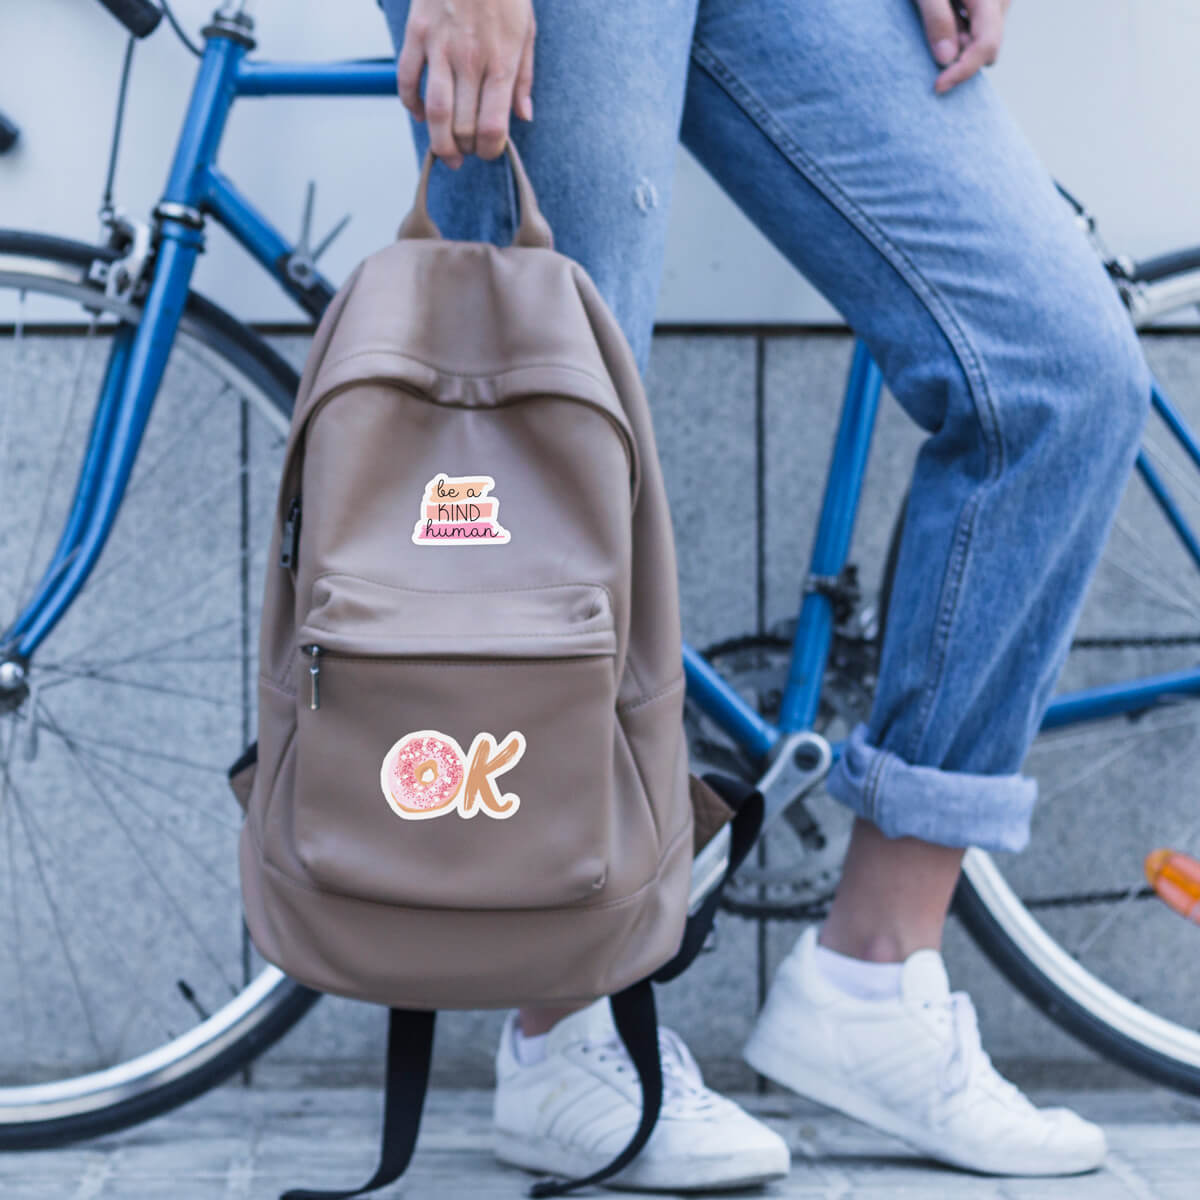 person standing by a bicycle holding a customized backpack